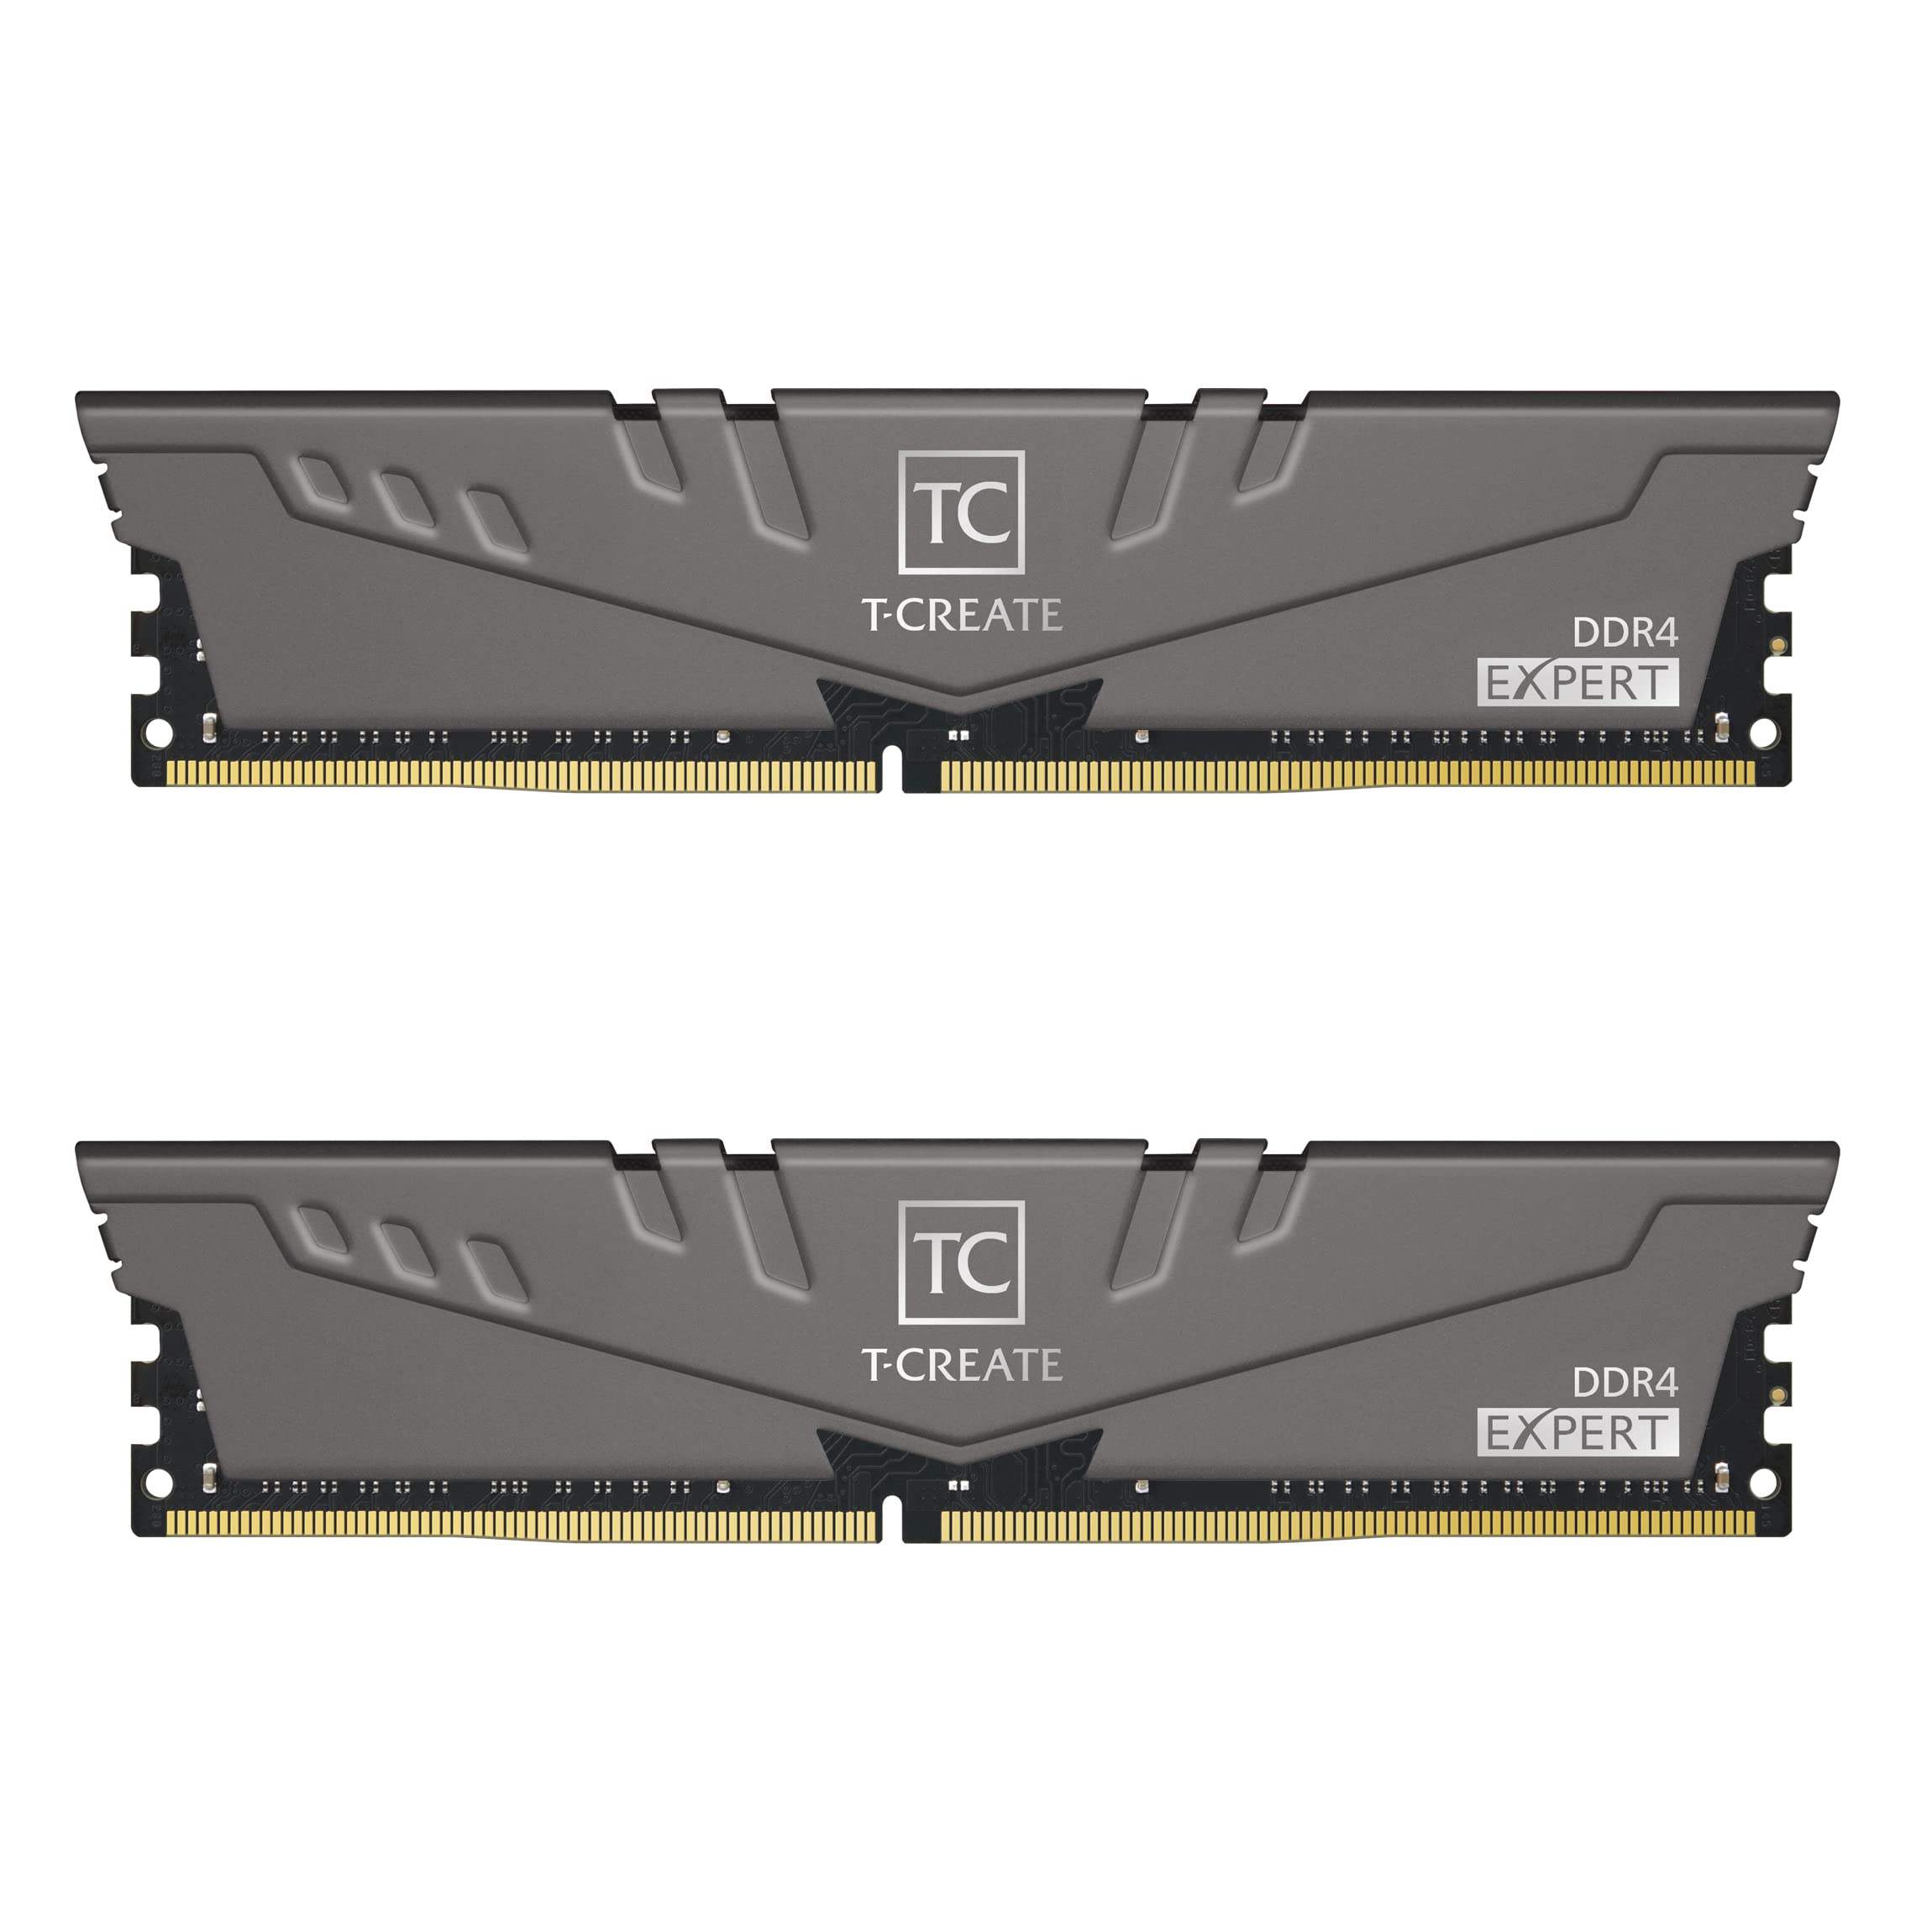 32GB (2 x 16GB) TEAMGROUP T-Create Expert DDR4 3200 CL16 Desktop Memory $53 + Free Shipping